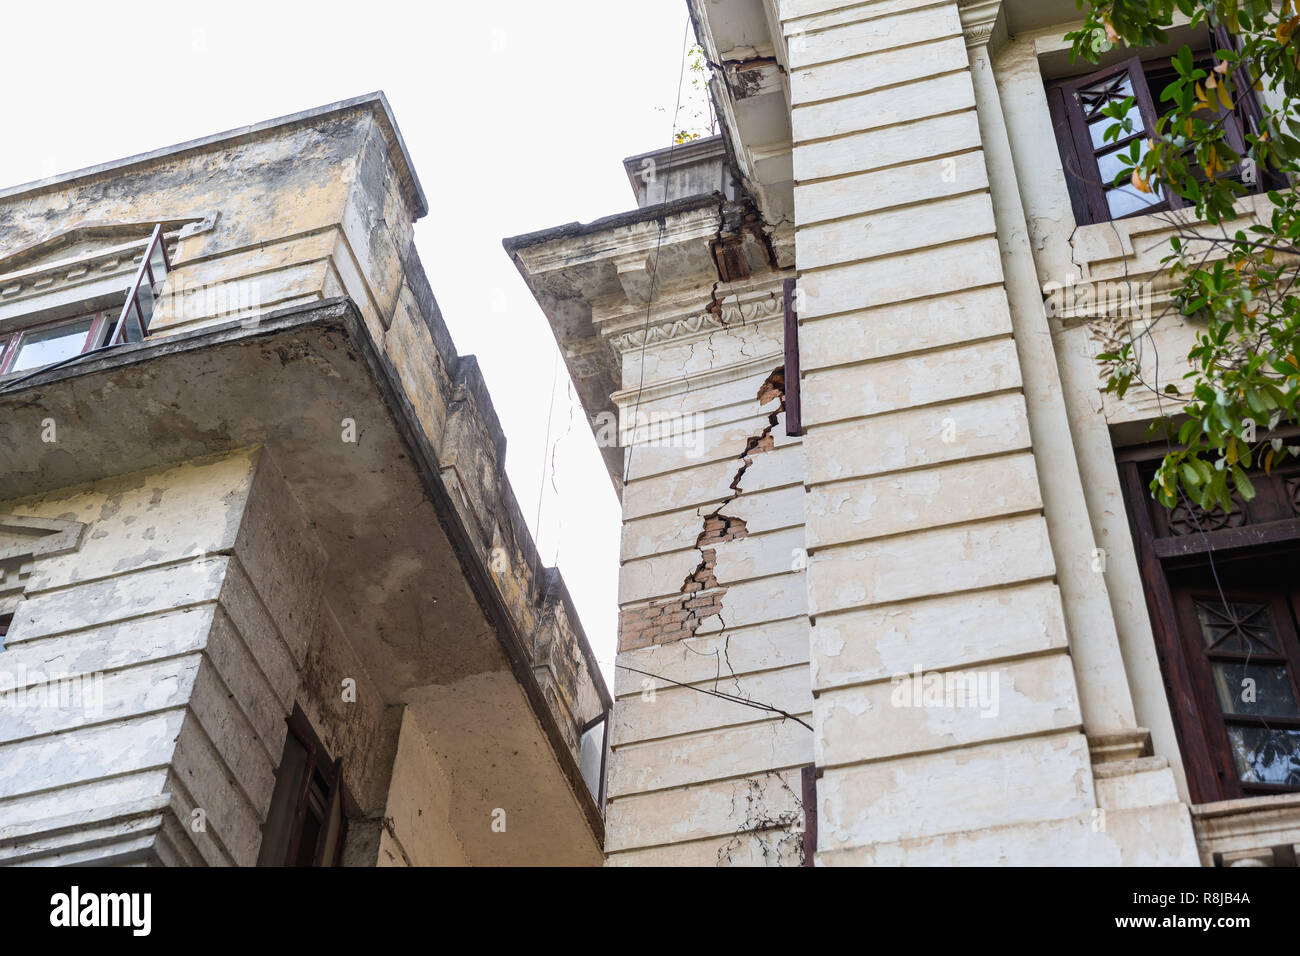 Earthquake damage, large crack in a building exterior in Kathmandu, Nepal Stock Photo